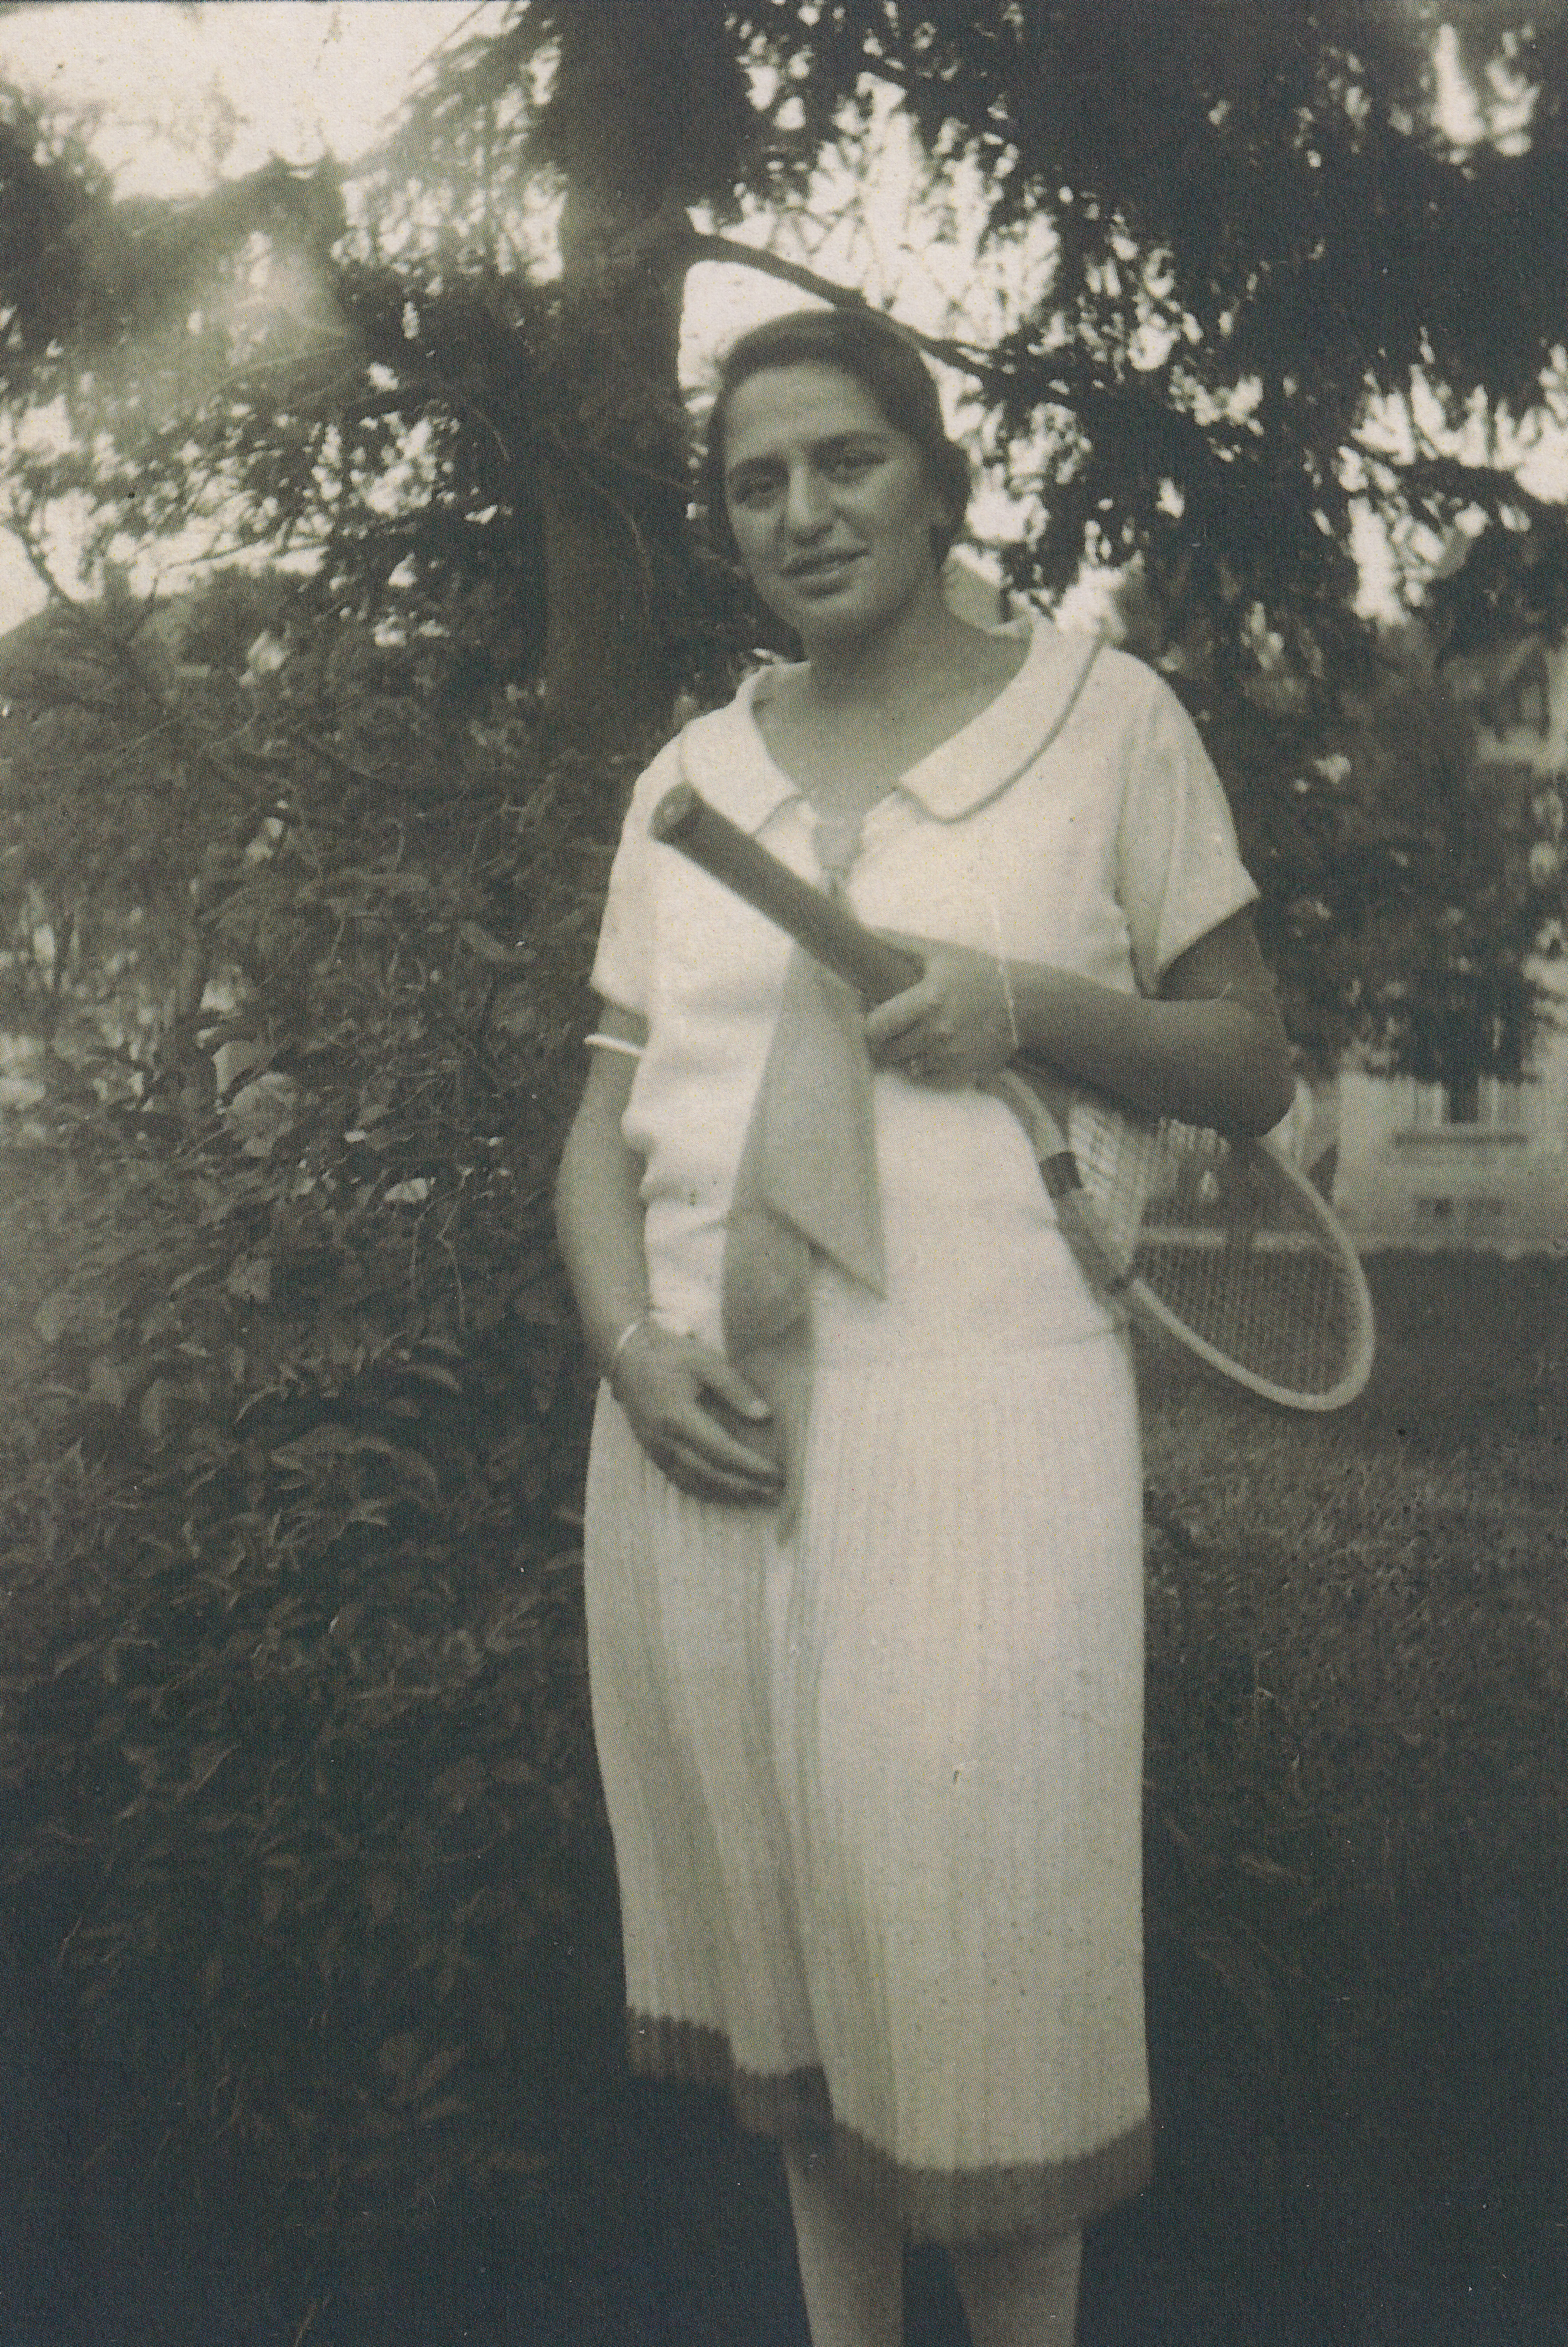 Elsa Bloch in tennis clothes with tennis racket, 1926.